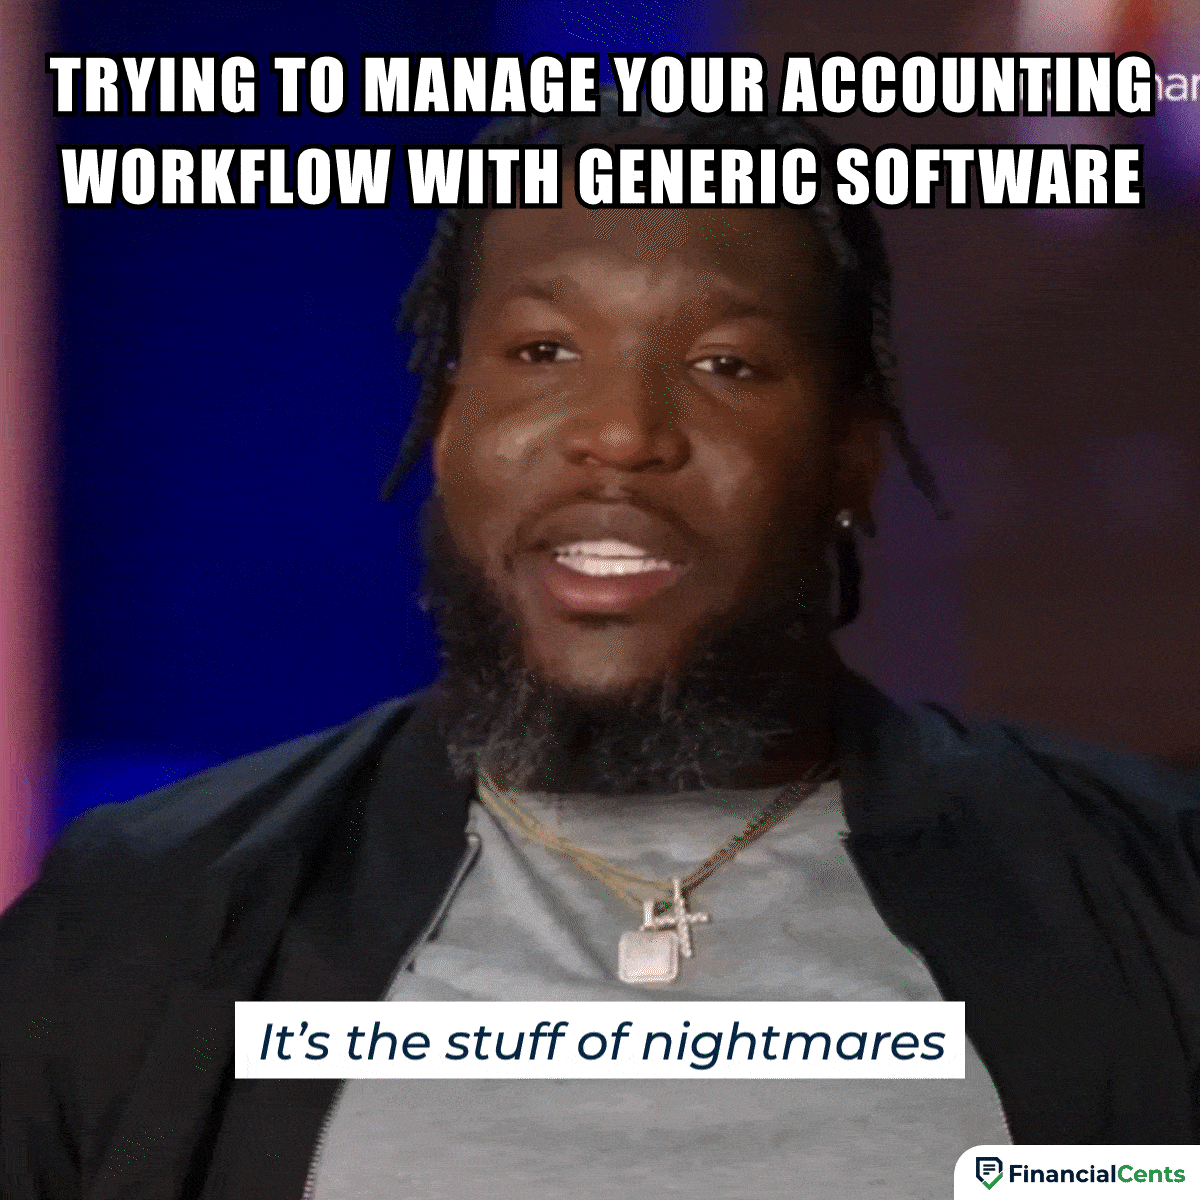 using generic workflow software for accounting workflow memes